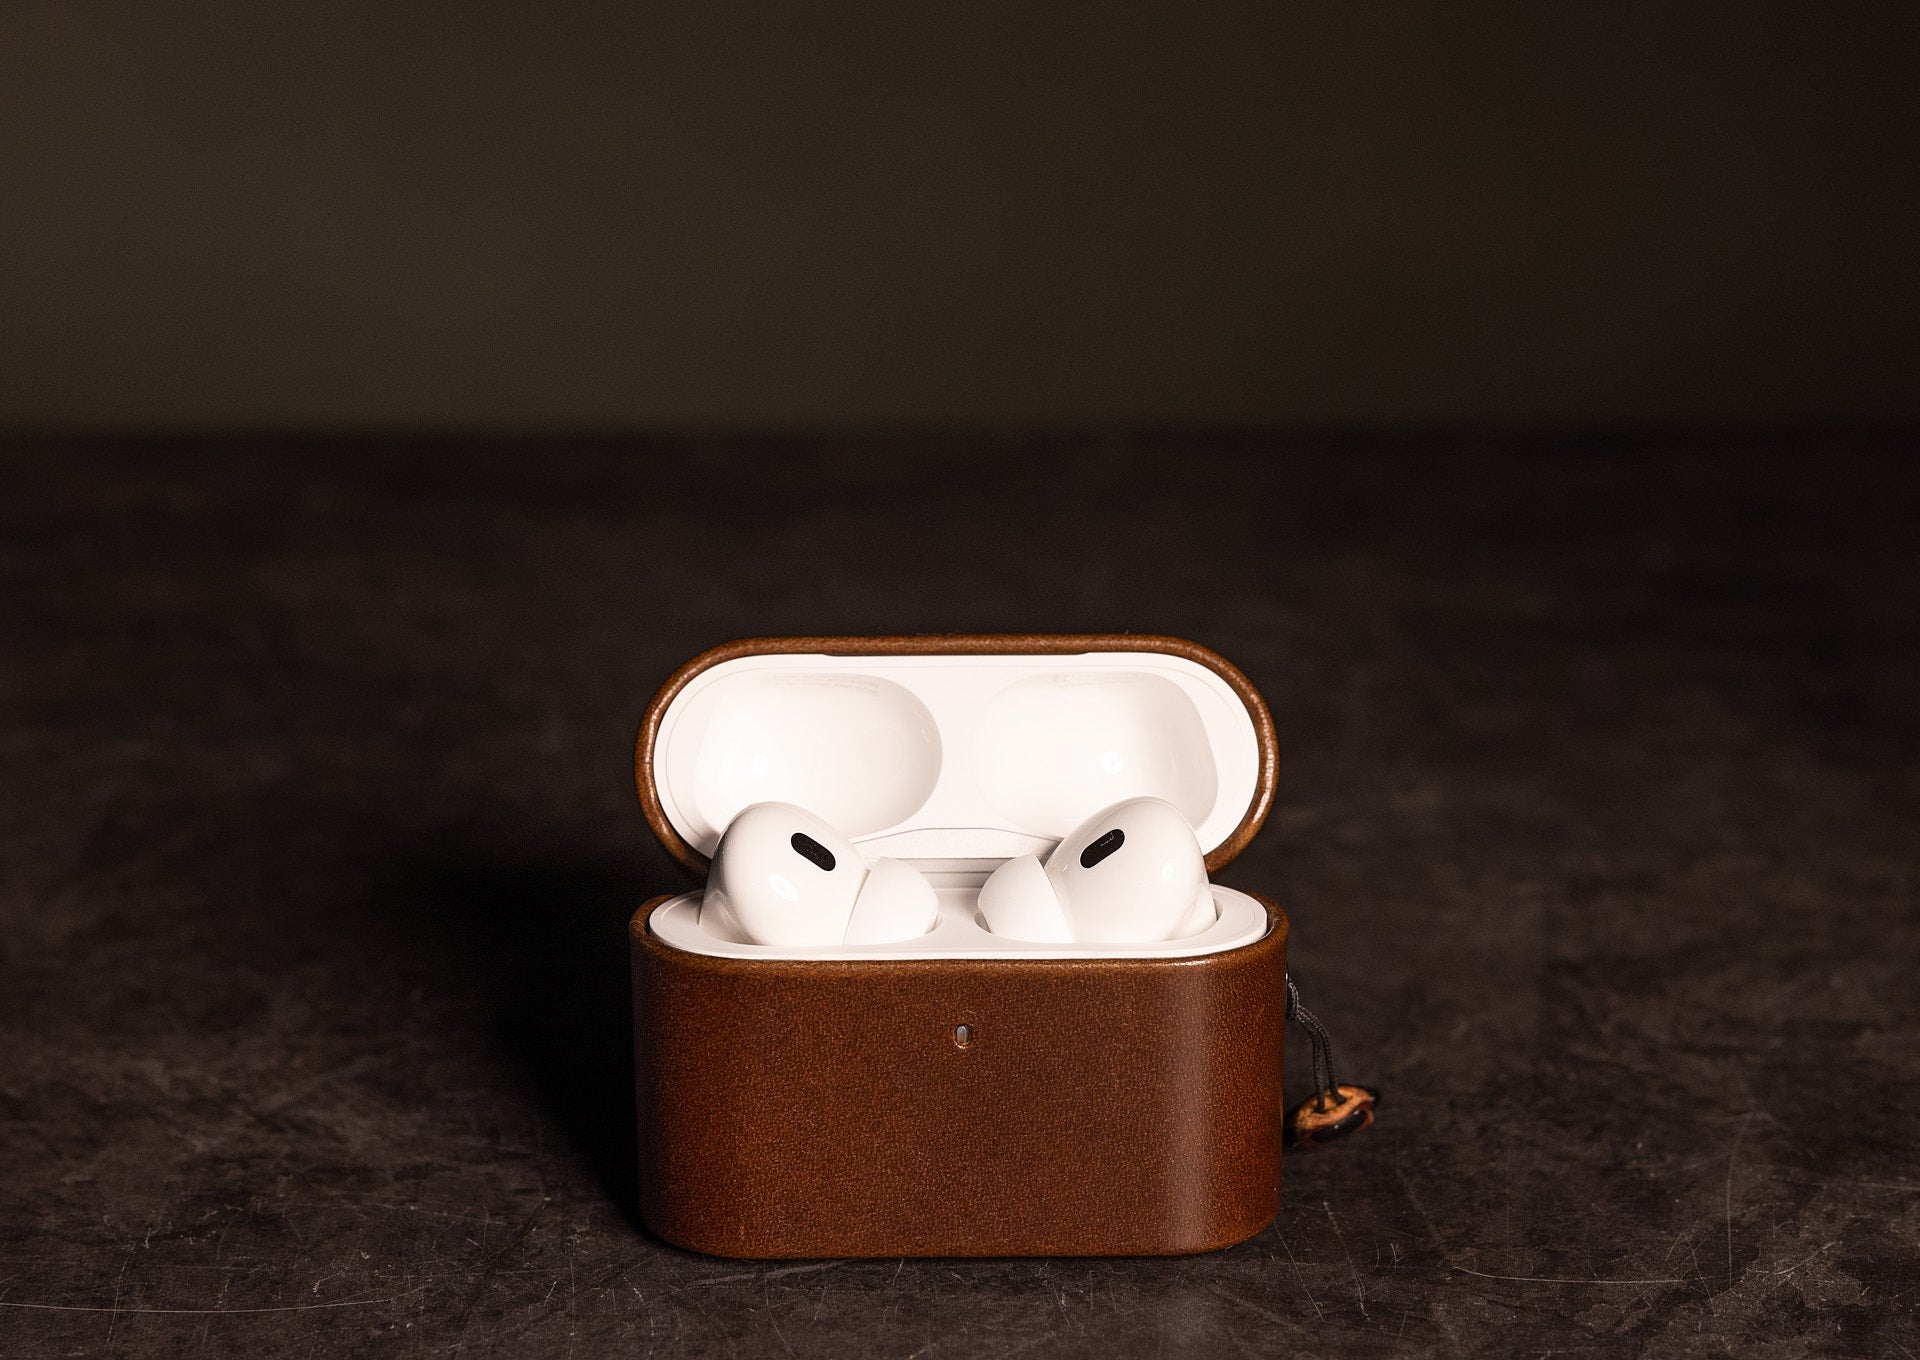 leather AirPods Case – Satchel & Page